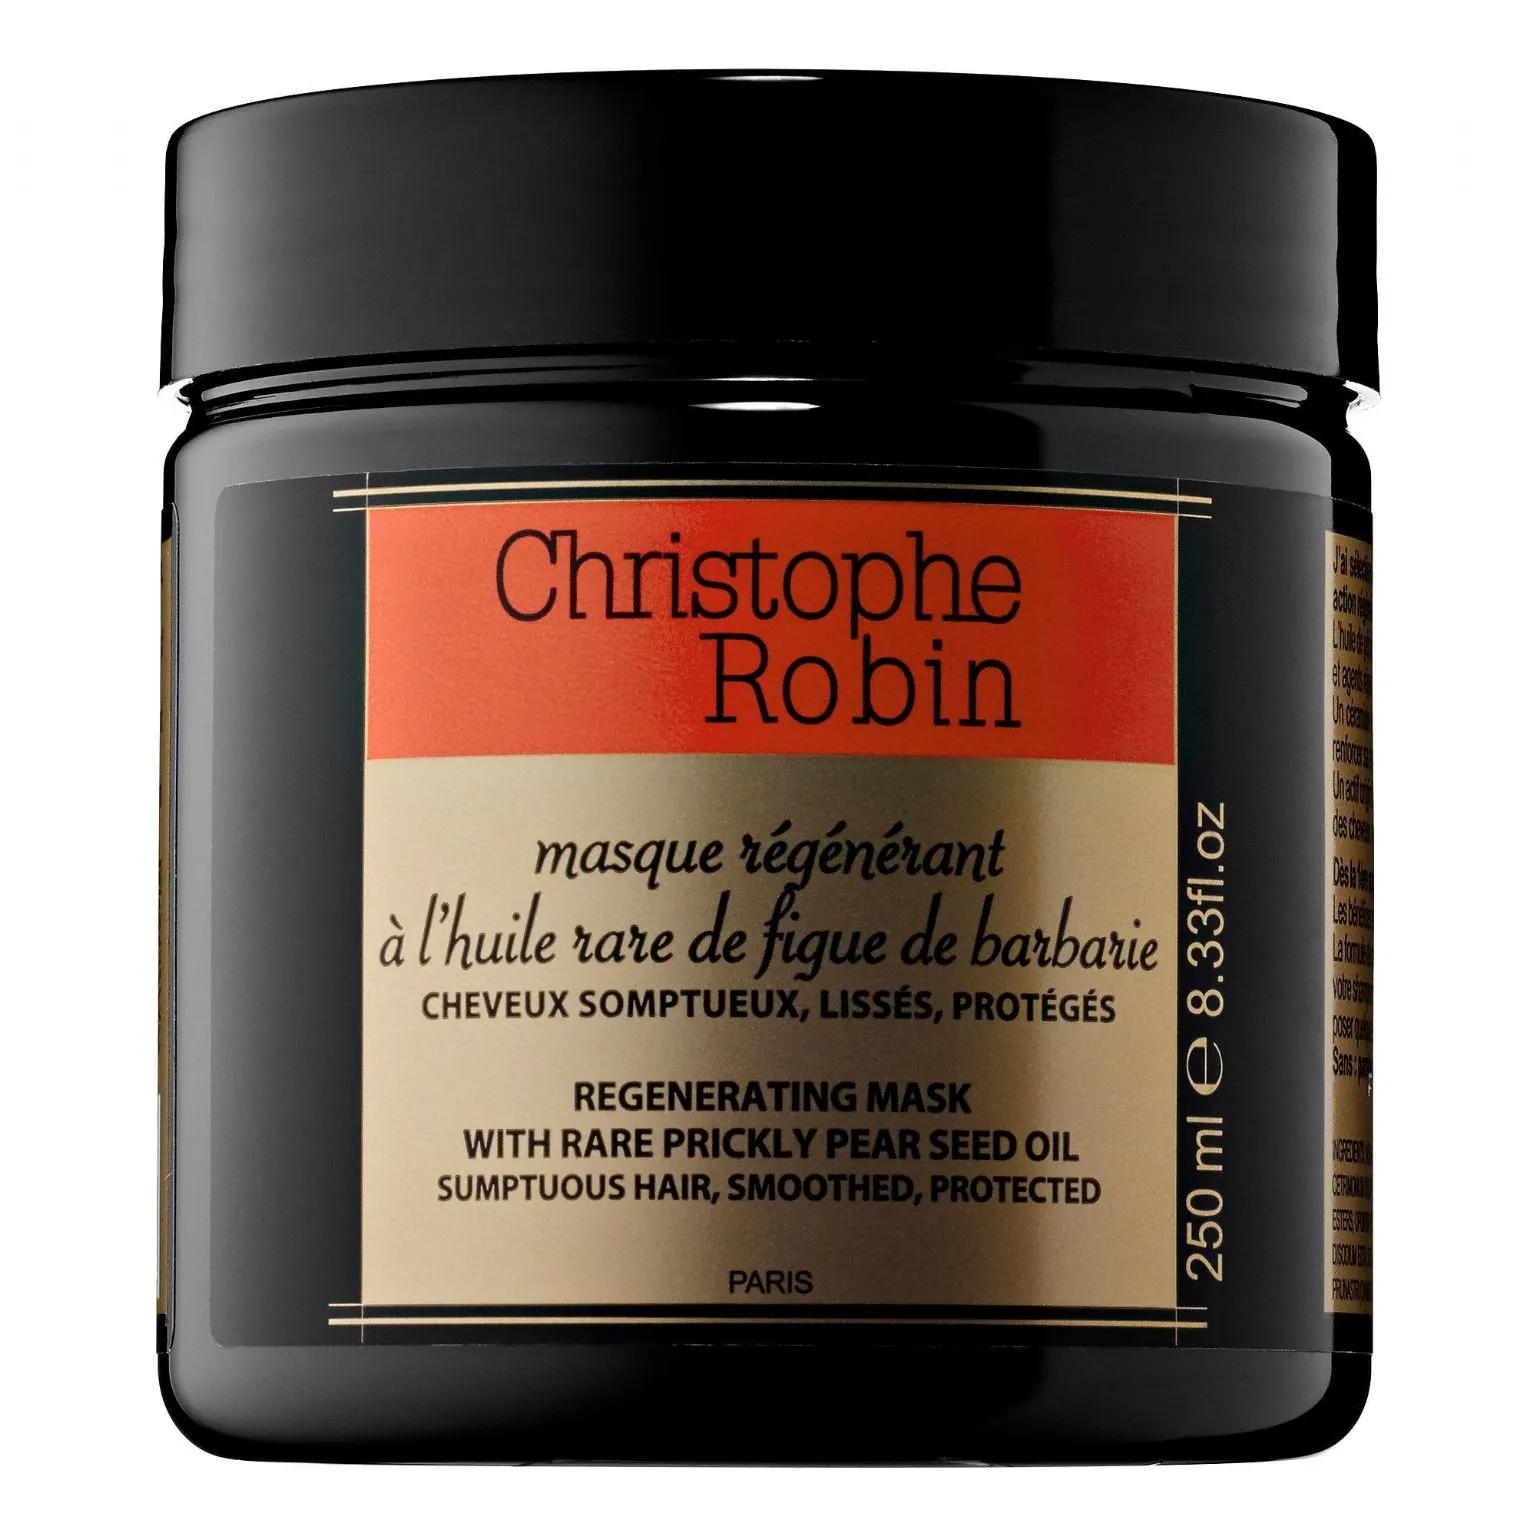 Regenerating Mask With Rare Prickly Pear Seed Oil by Christophe Robin, the best French hair mask for indulgence.